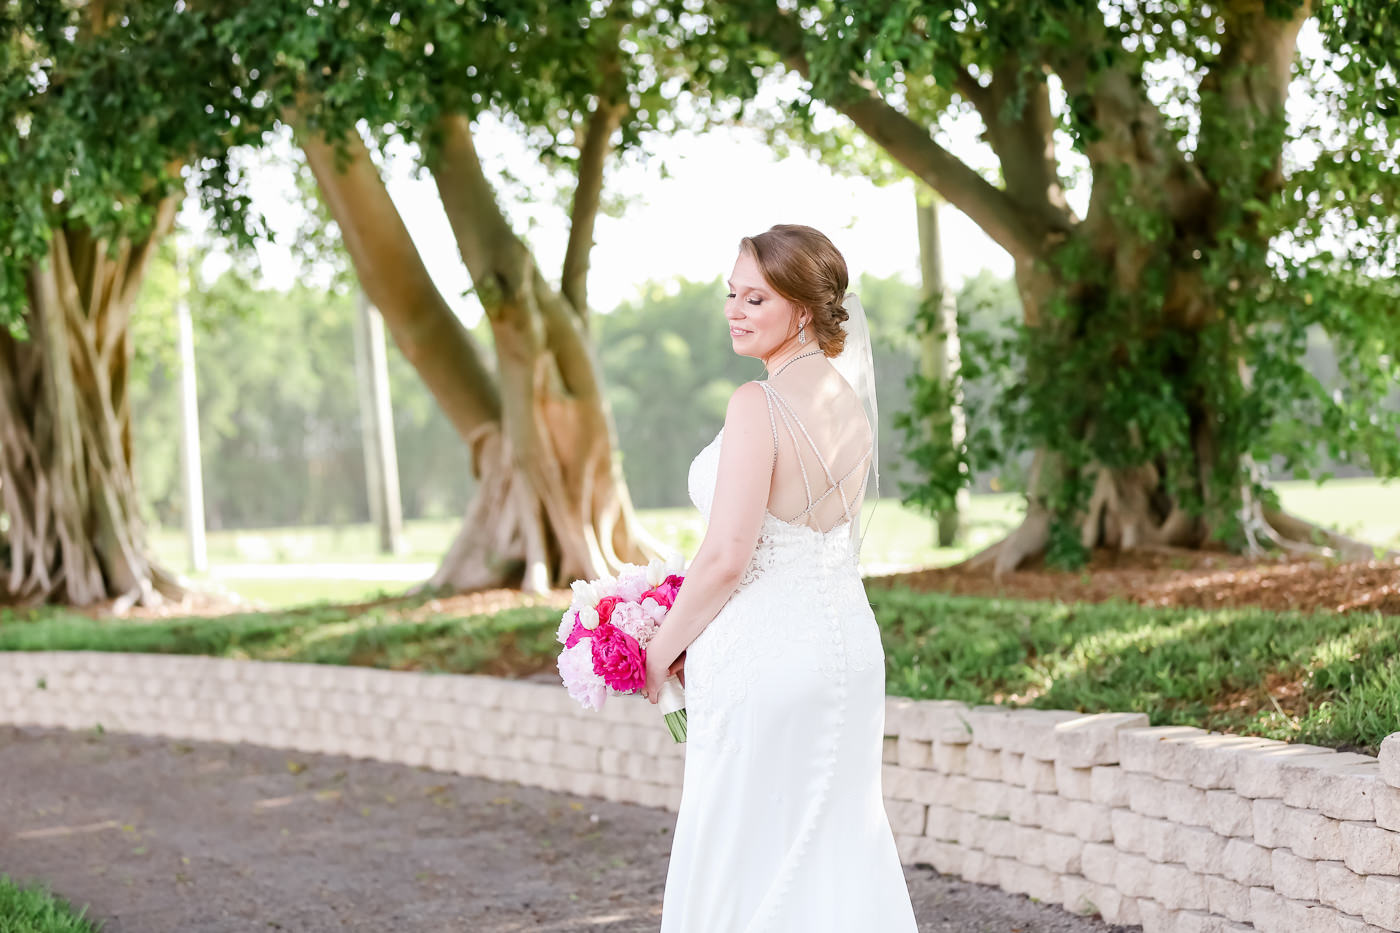 Bride Beauty Wedding Portrait in Romantic Fitted Stella York Lace Dress with Beaded Criss Cross Straps Holding Pink Floral Bouquet | Tampa Bay Wedding Photographer Lifelong Photography Studios | Wedding Hair and Makeup Michele Renee the Studio